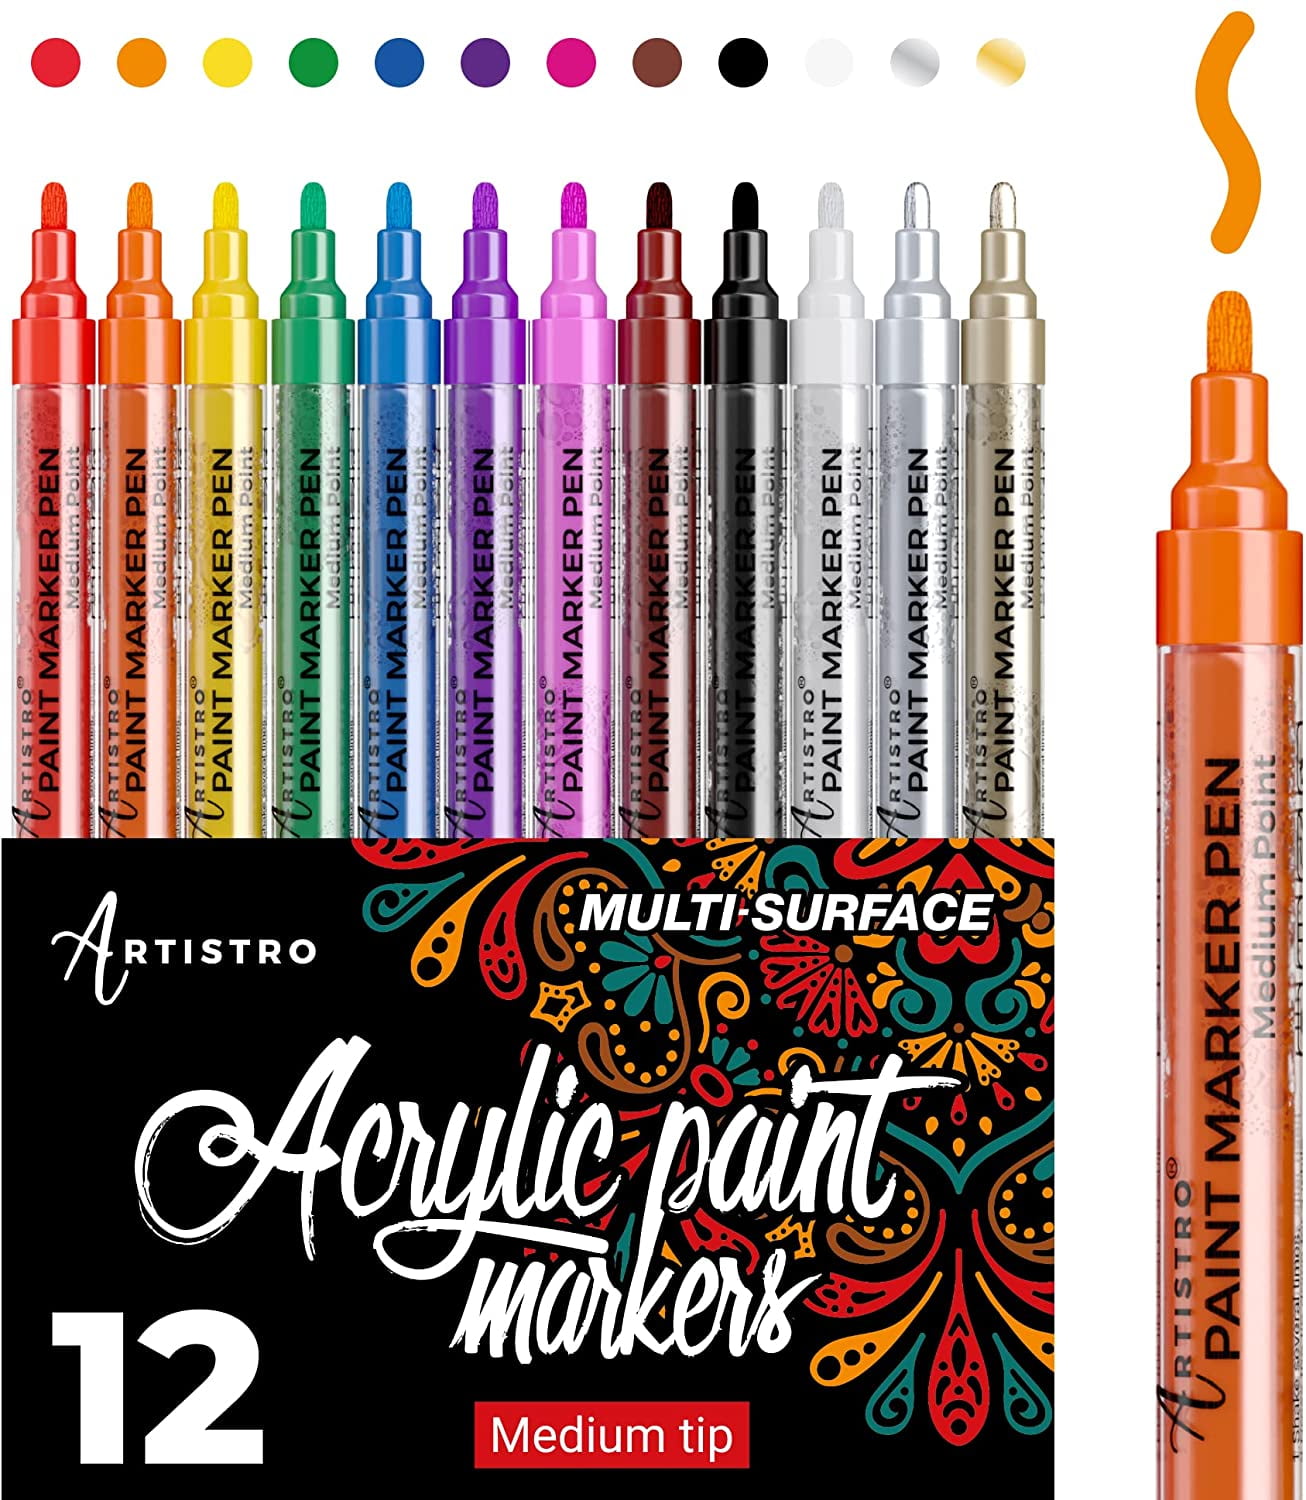 Glass Ceramic Wood Stone Fine Tip Water Based Paint Markers Acrylic Paint Pens for Rock Painting Canvas Set of 15 Colors 